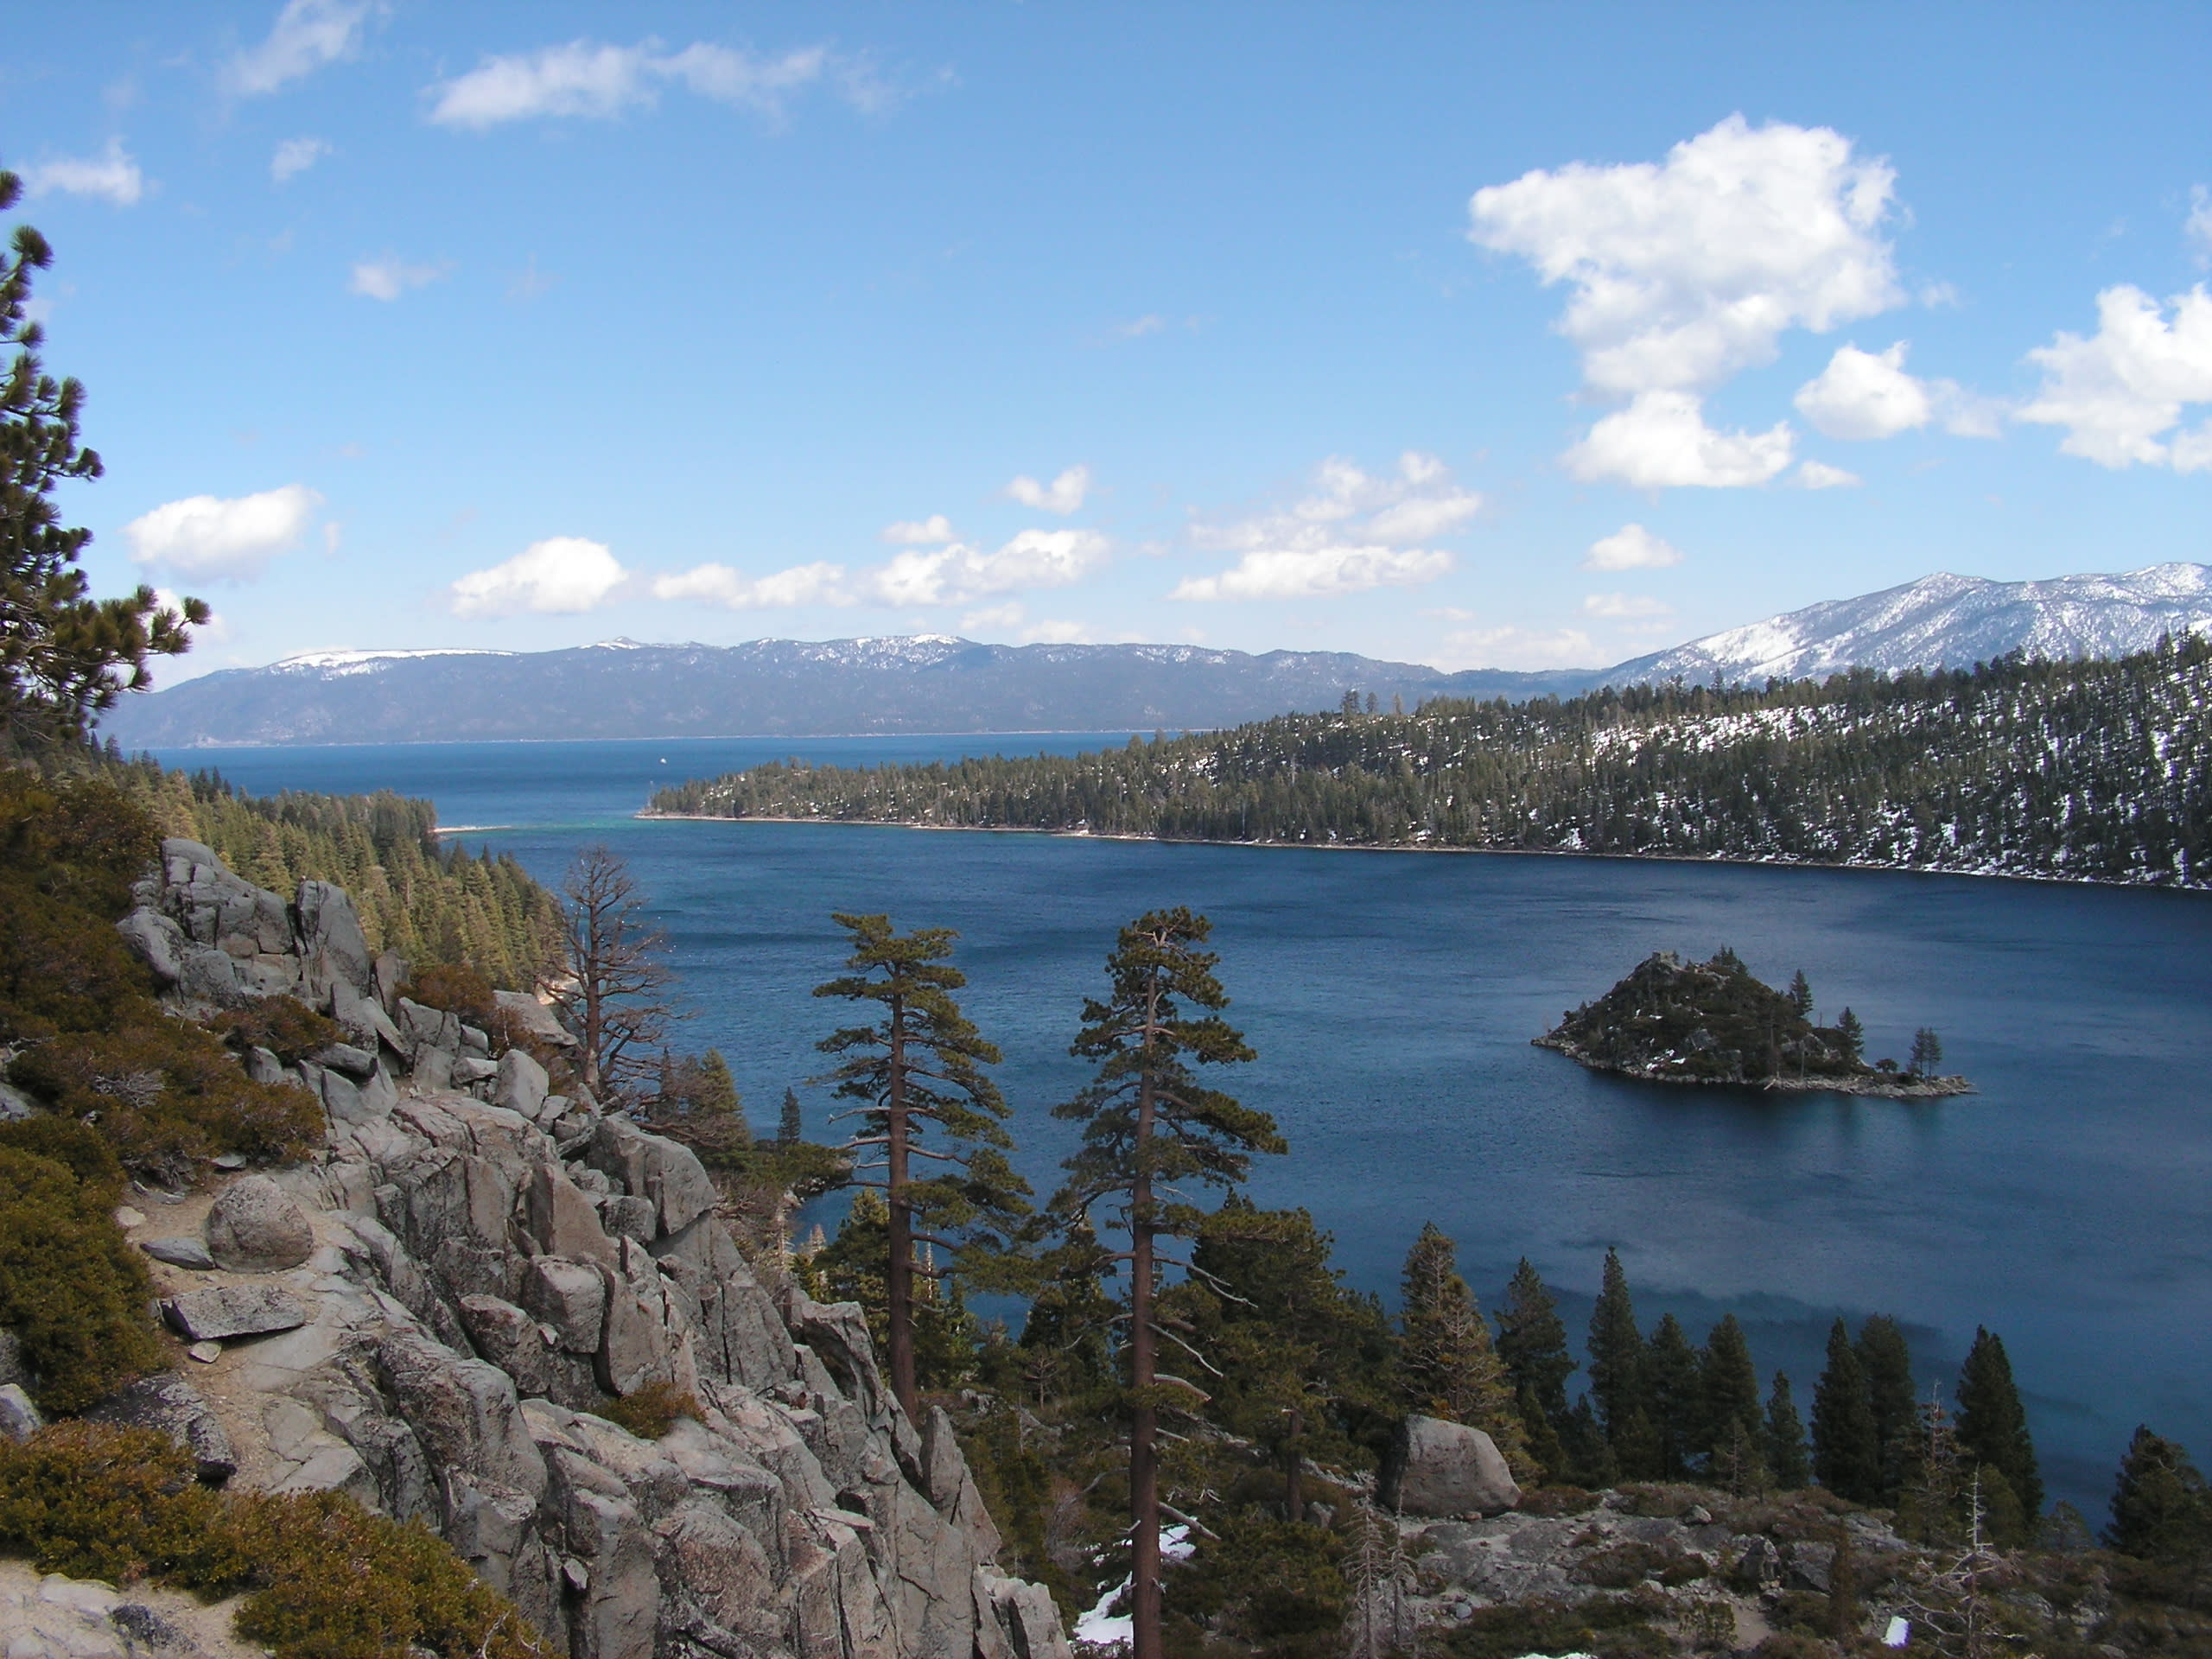 Tahoe National Forest